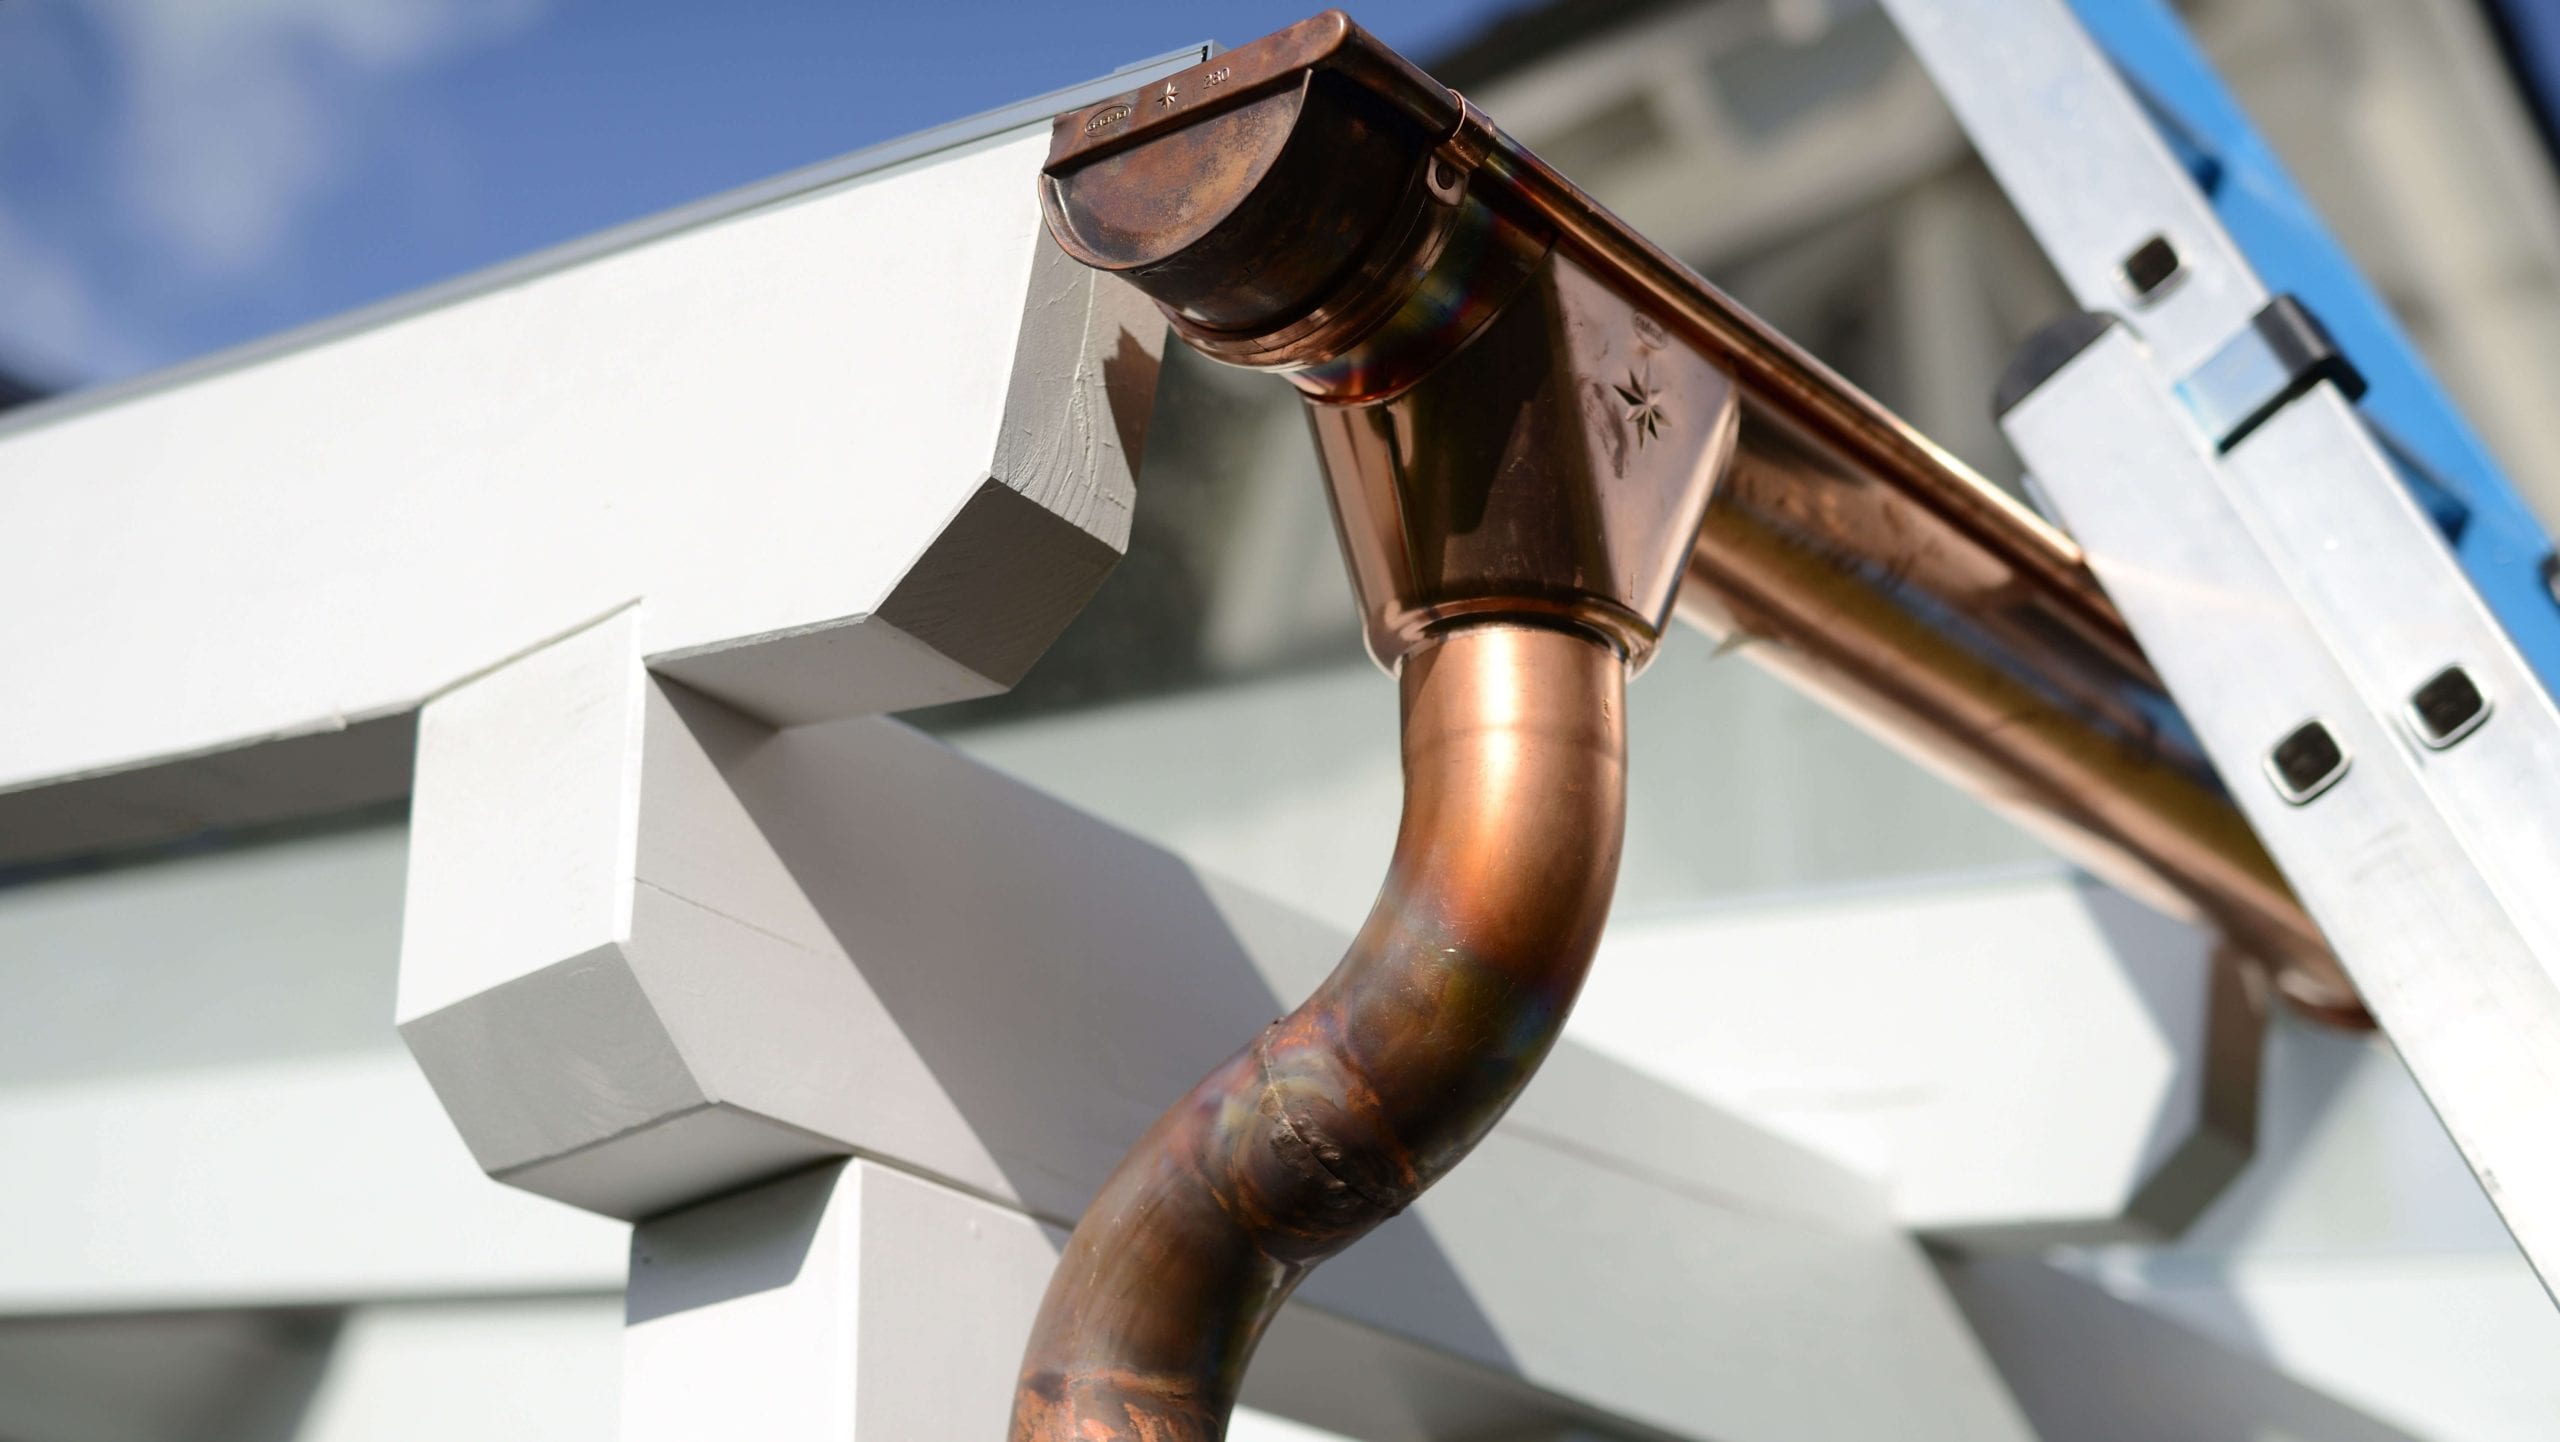 Make your property stand out with copper gutters. Contact for gutter installation in Sacramento